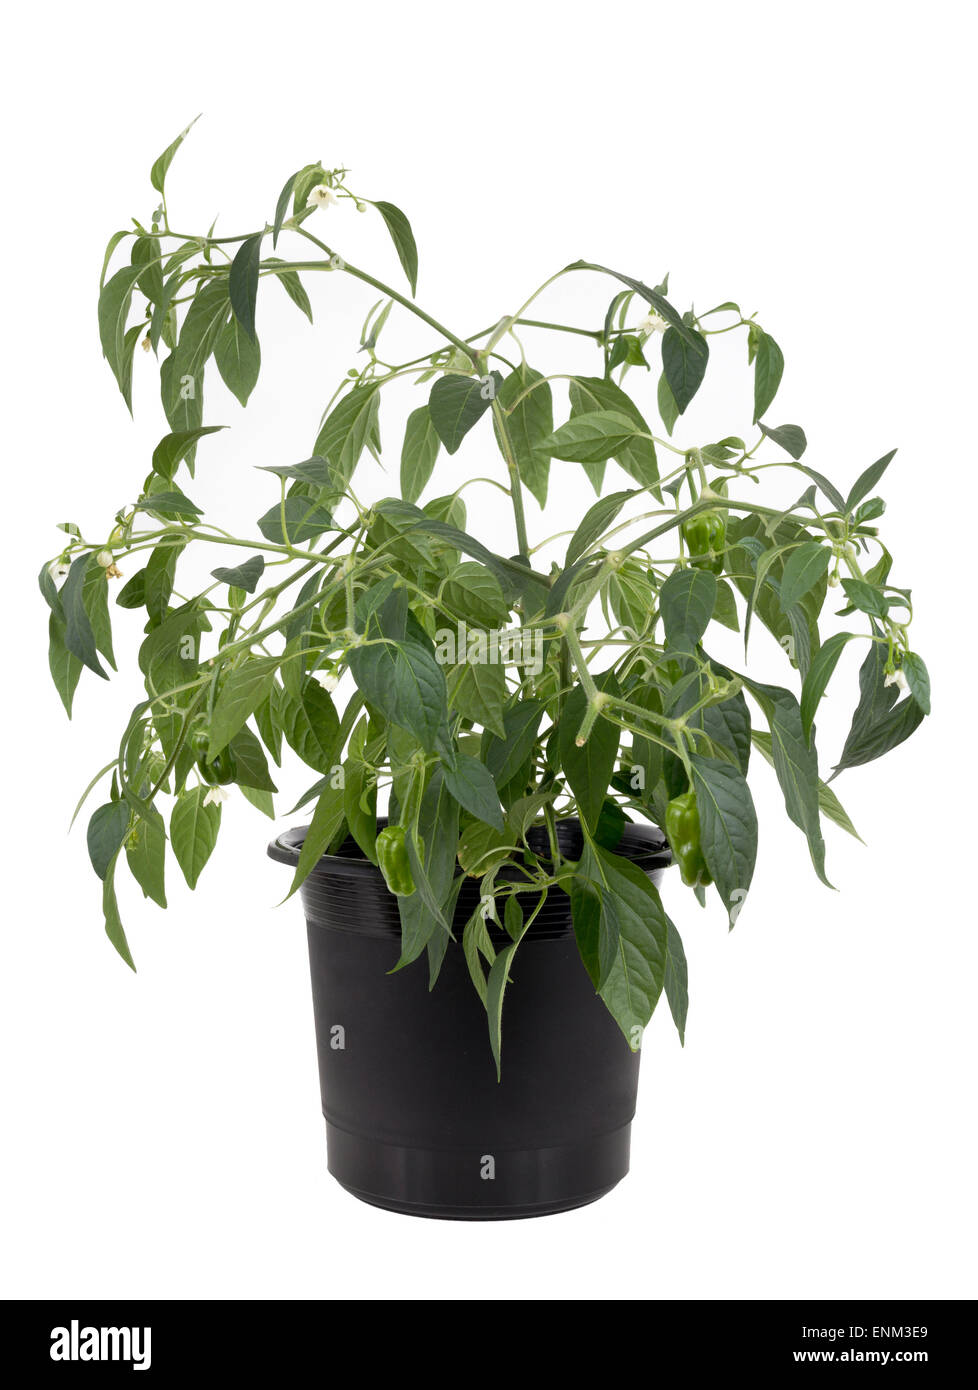 Potted hot pepper jalapeno plant growing over white background Stock Photo